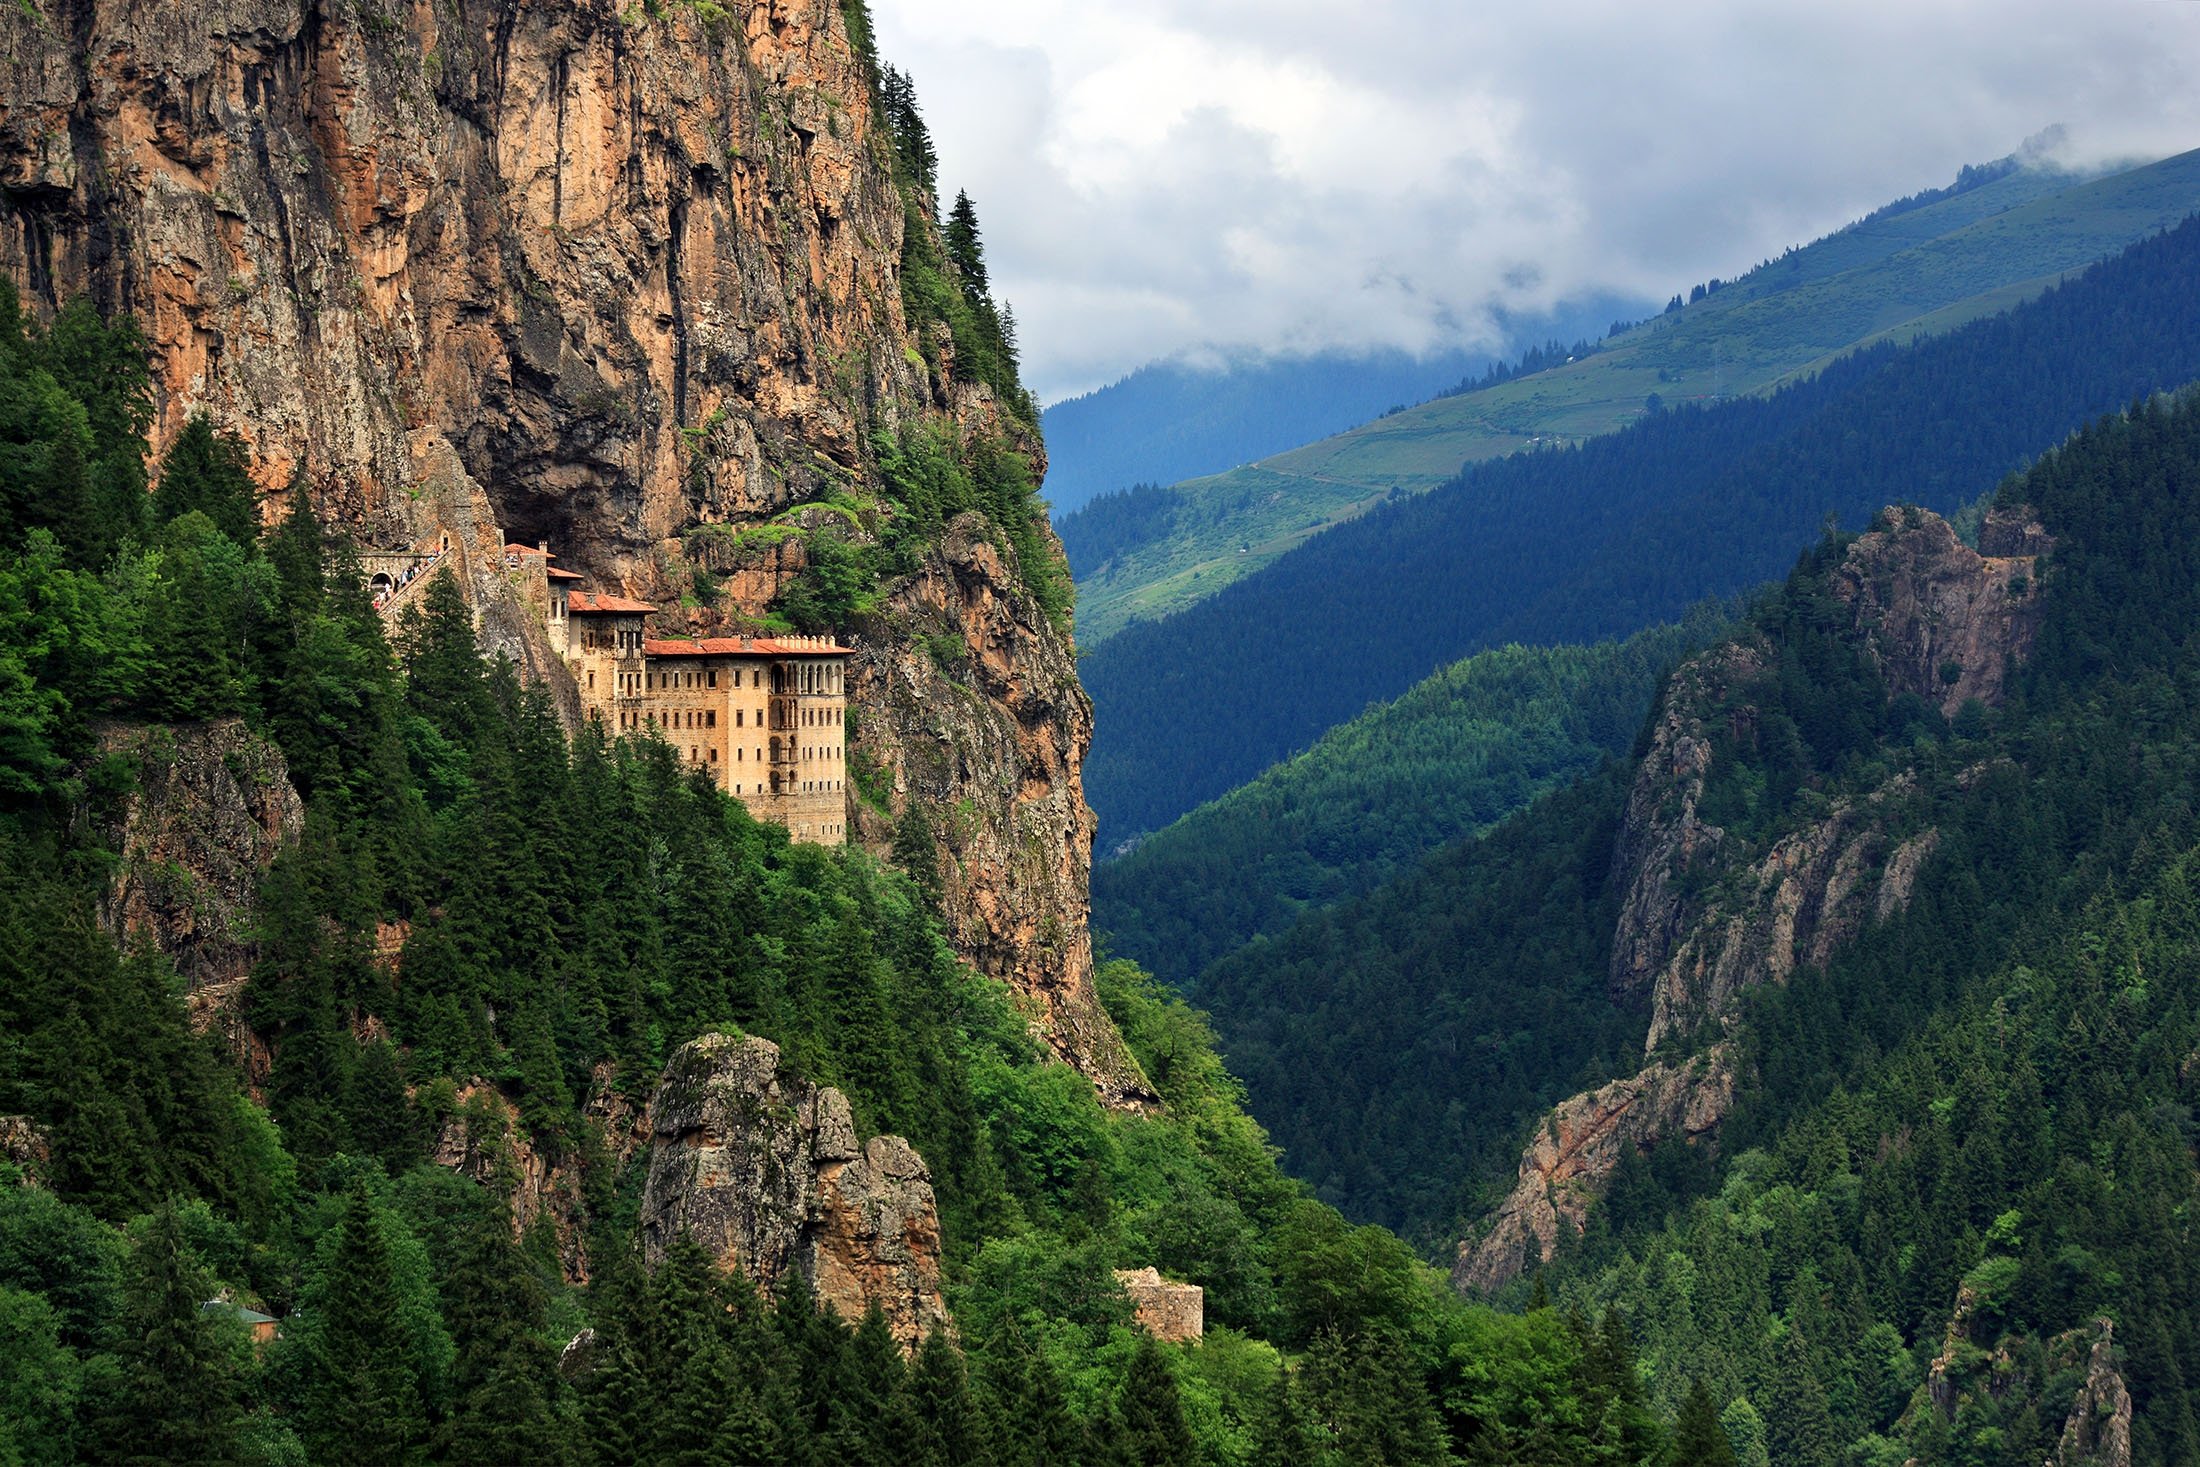 Built in the 4th century, the Sümela Monastery is carved into the Mela Mountain in Maçka, Trabzon. (Shutterstock Photo)